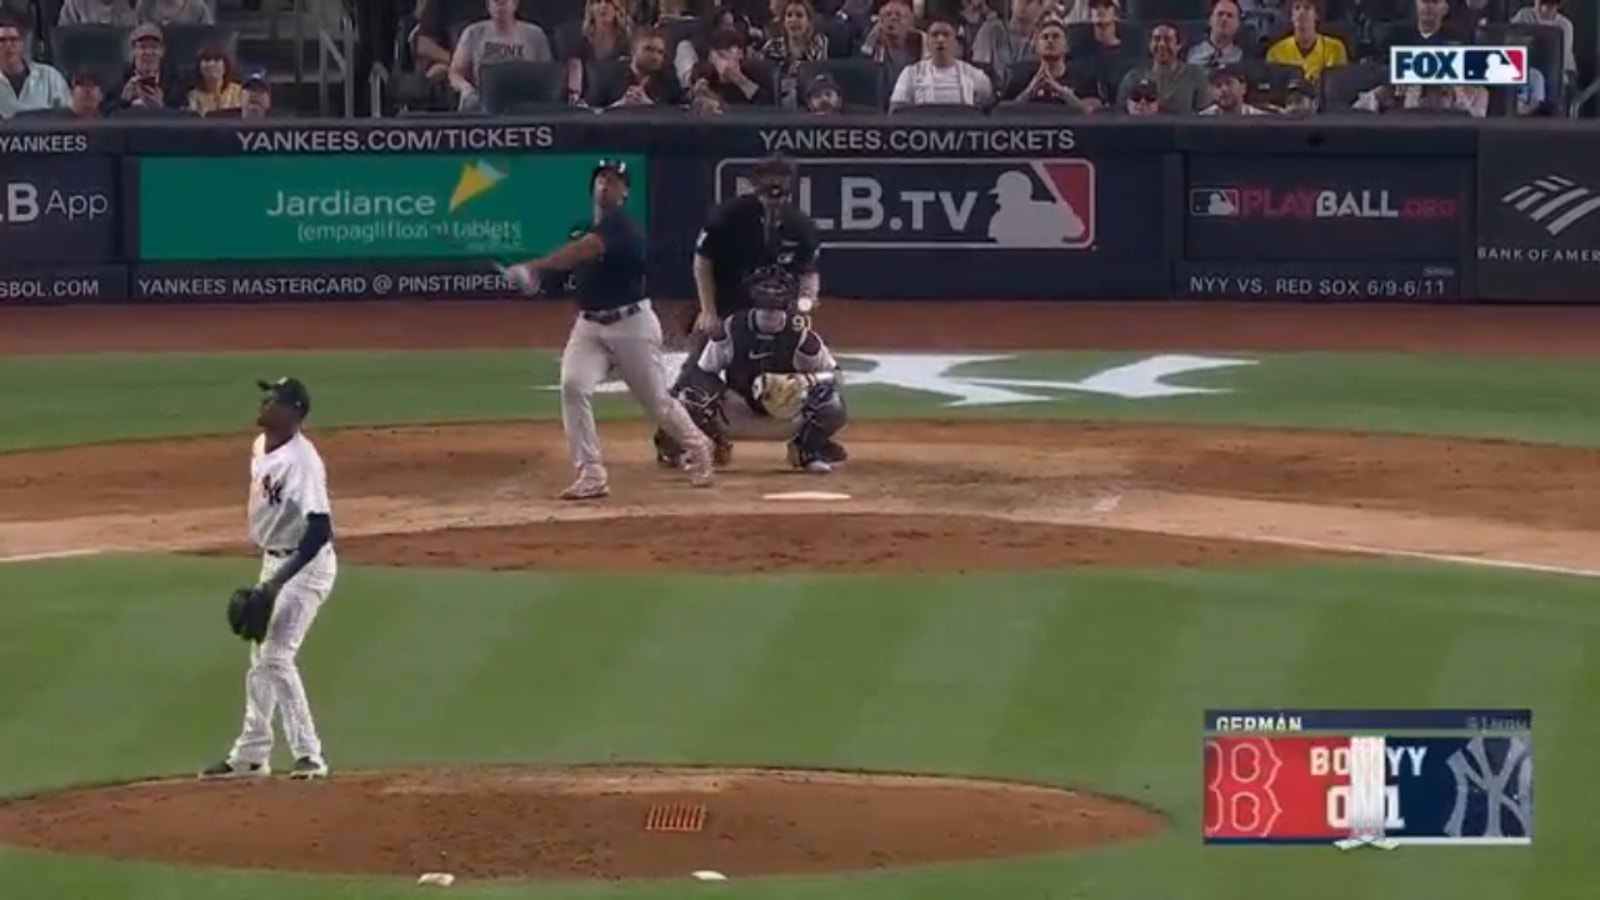 Red Sox's Rafael Devers SMACKS a solo home run to tie the game against the Yankees